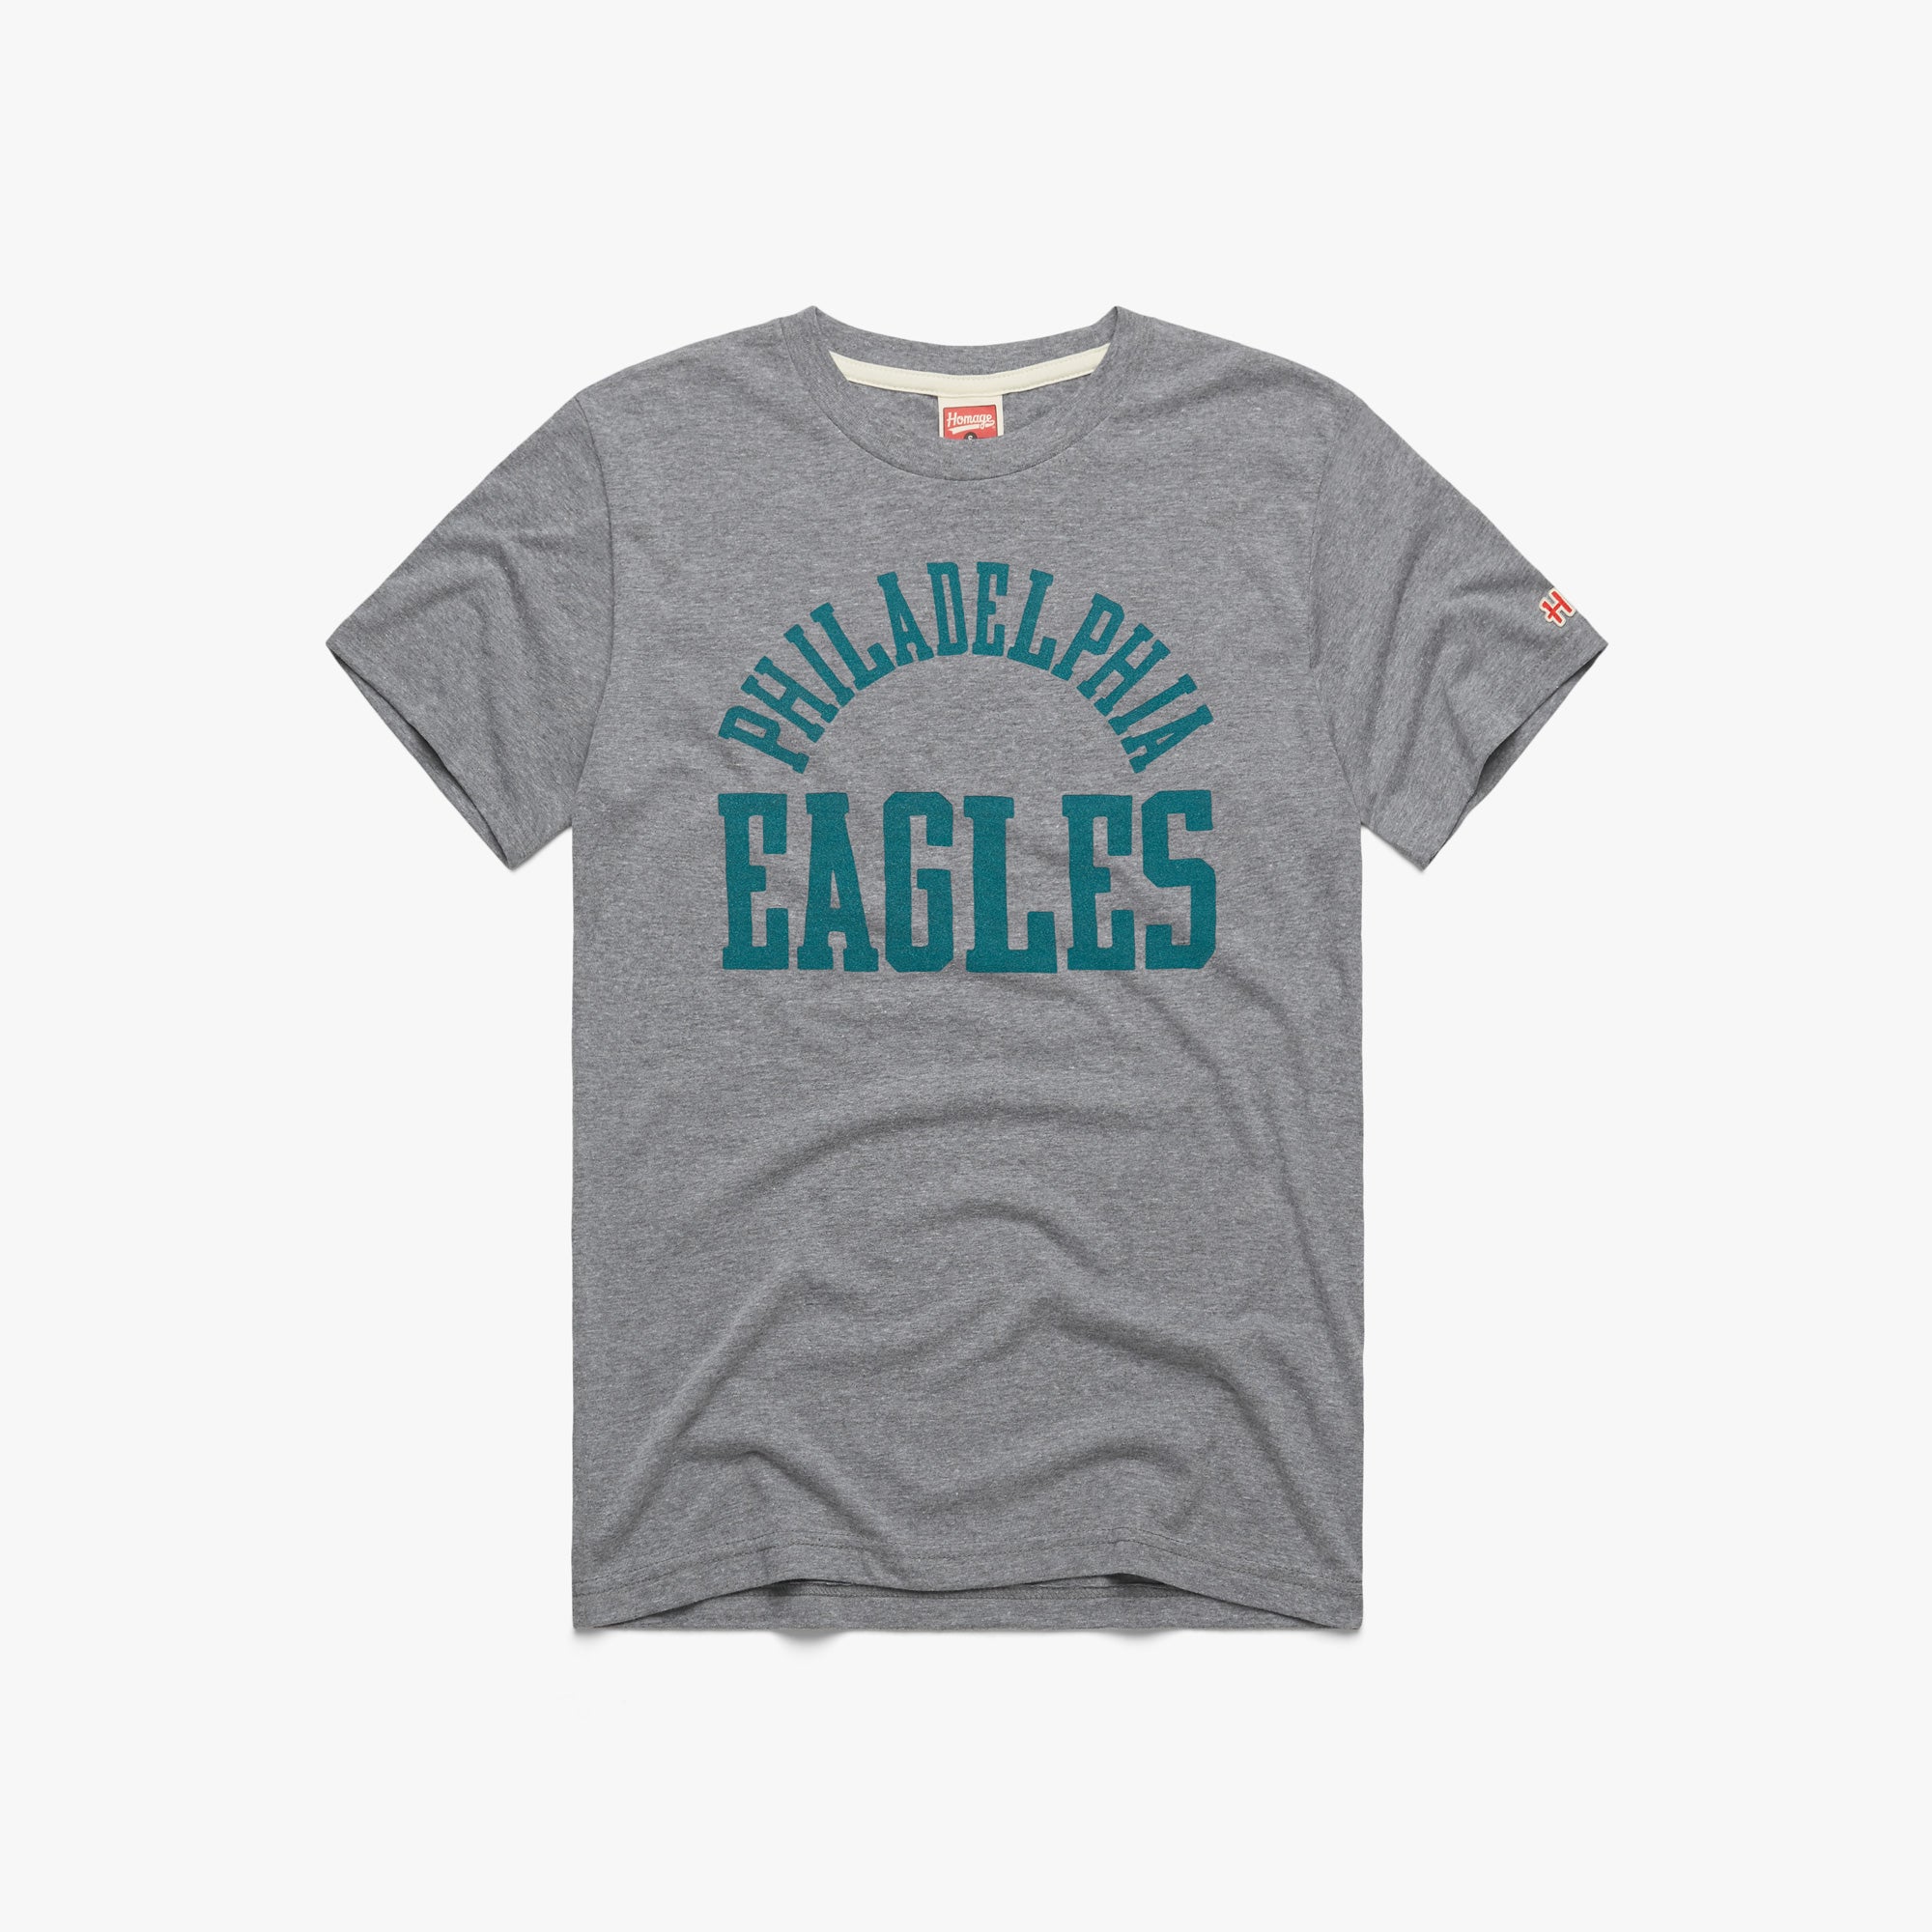 Philadelphia Eagles Classic T-Shirt | Kelly Green Eagles Apparel from Homage. | Officially Licensed NFL Apparel from Homage Pro Shop.